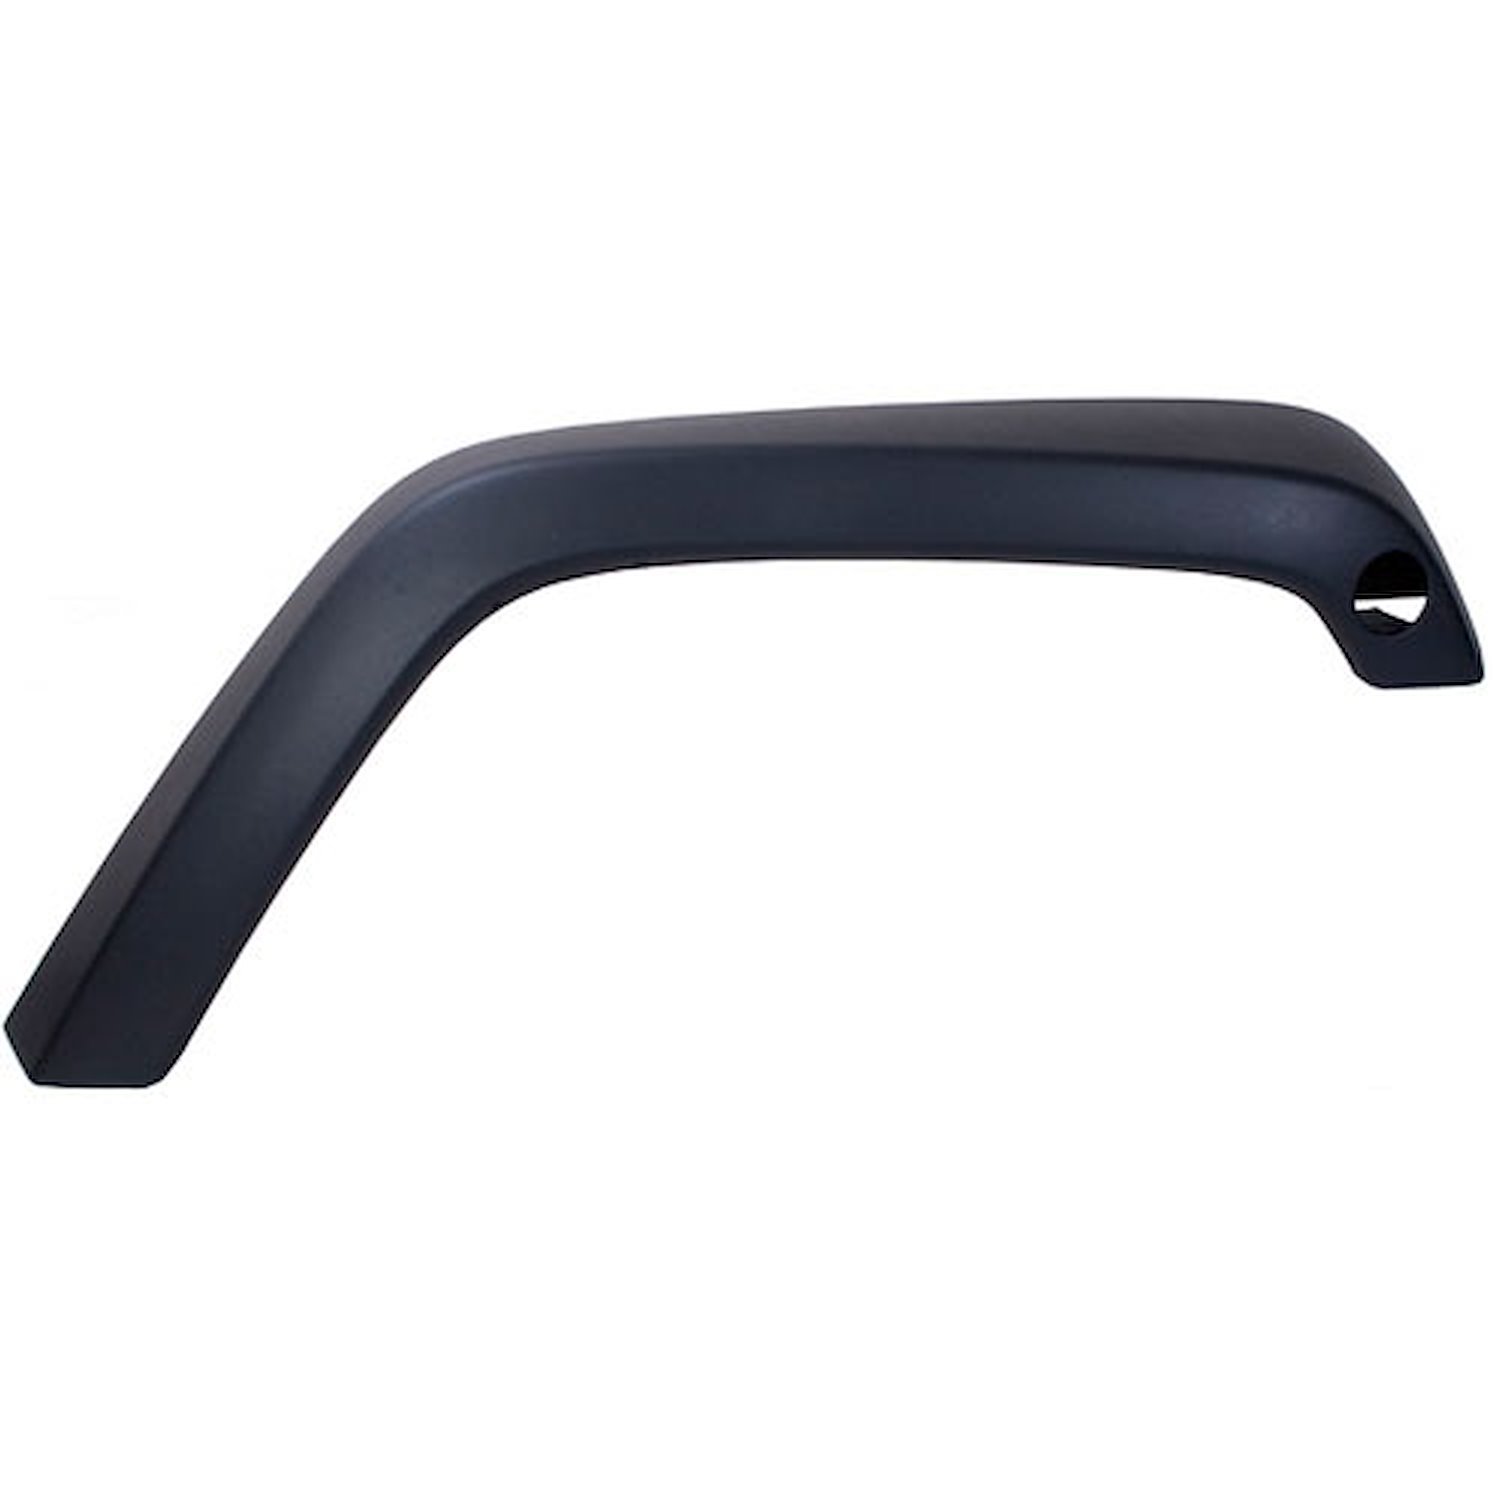 Replacement front fender flare , Fits 07-16 Jeep Wrangler, right side.